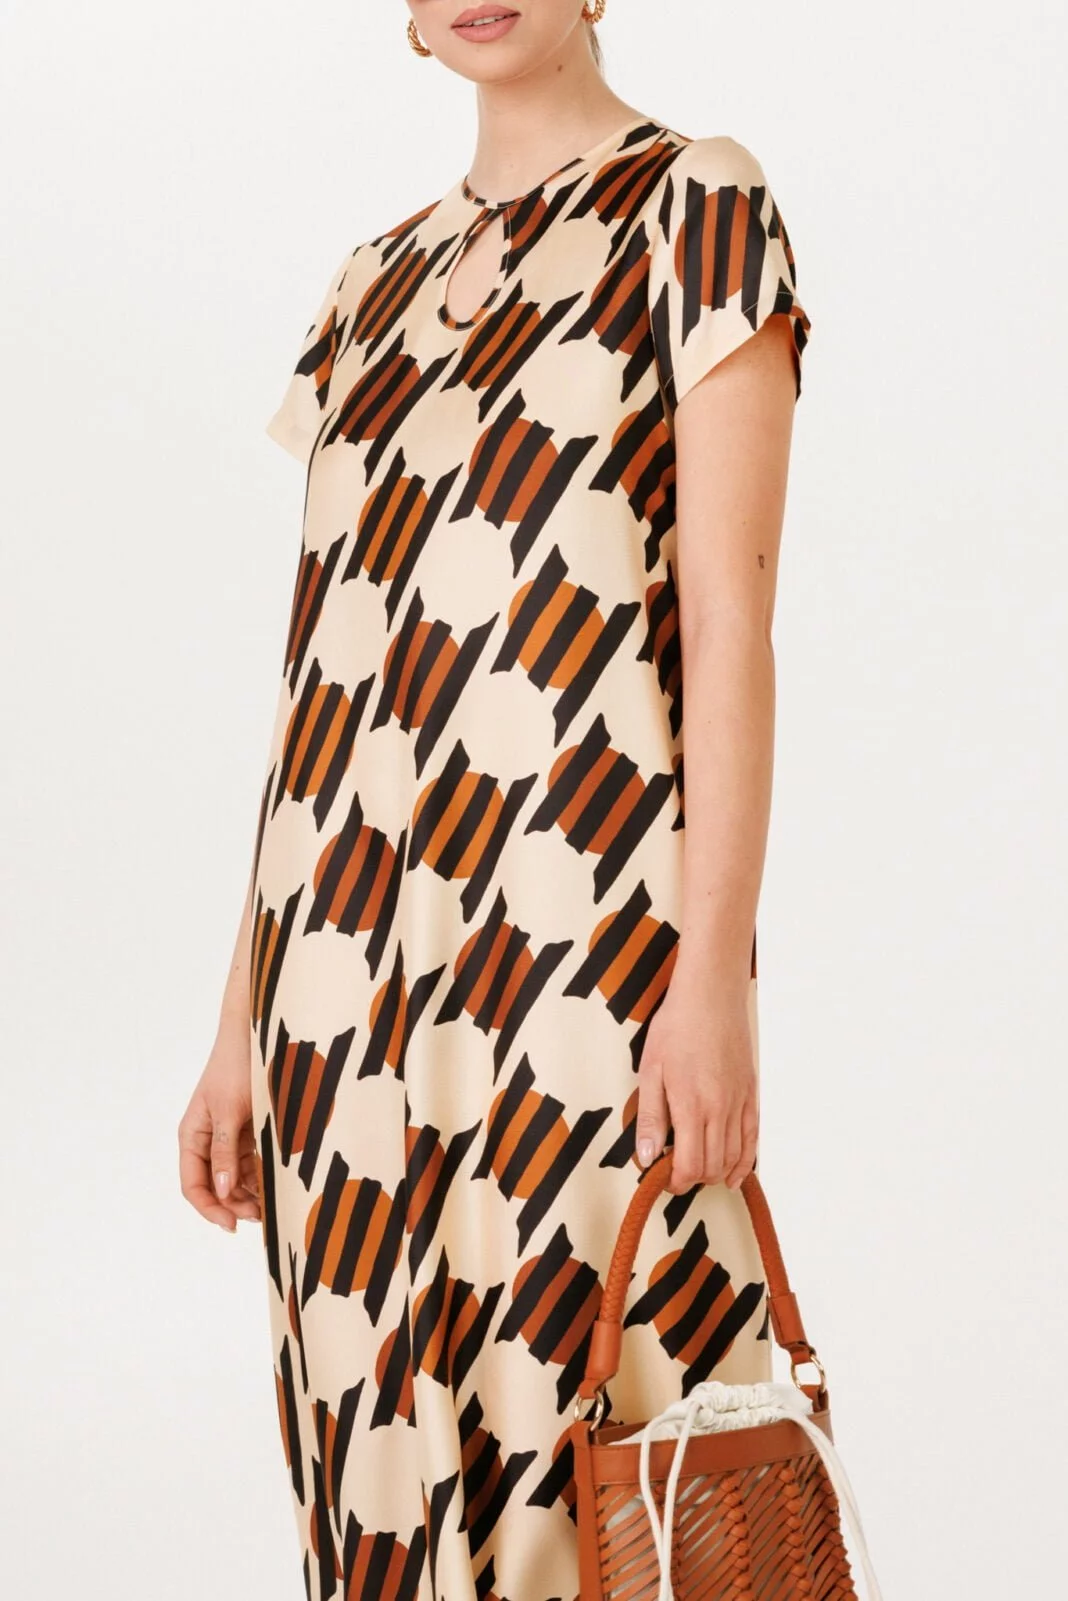 Geometric Print Kaftan Dress - Beige and Brown Summery Silk Twill for Vacation and Summer